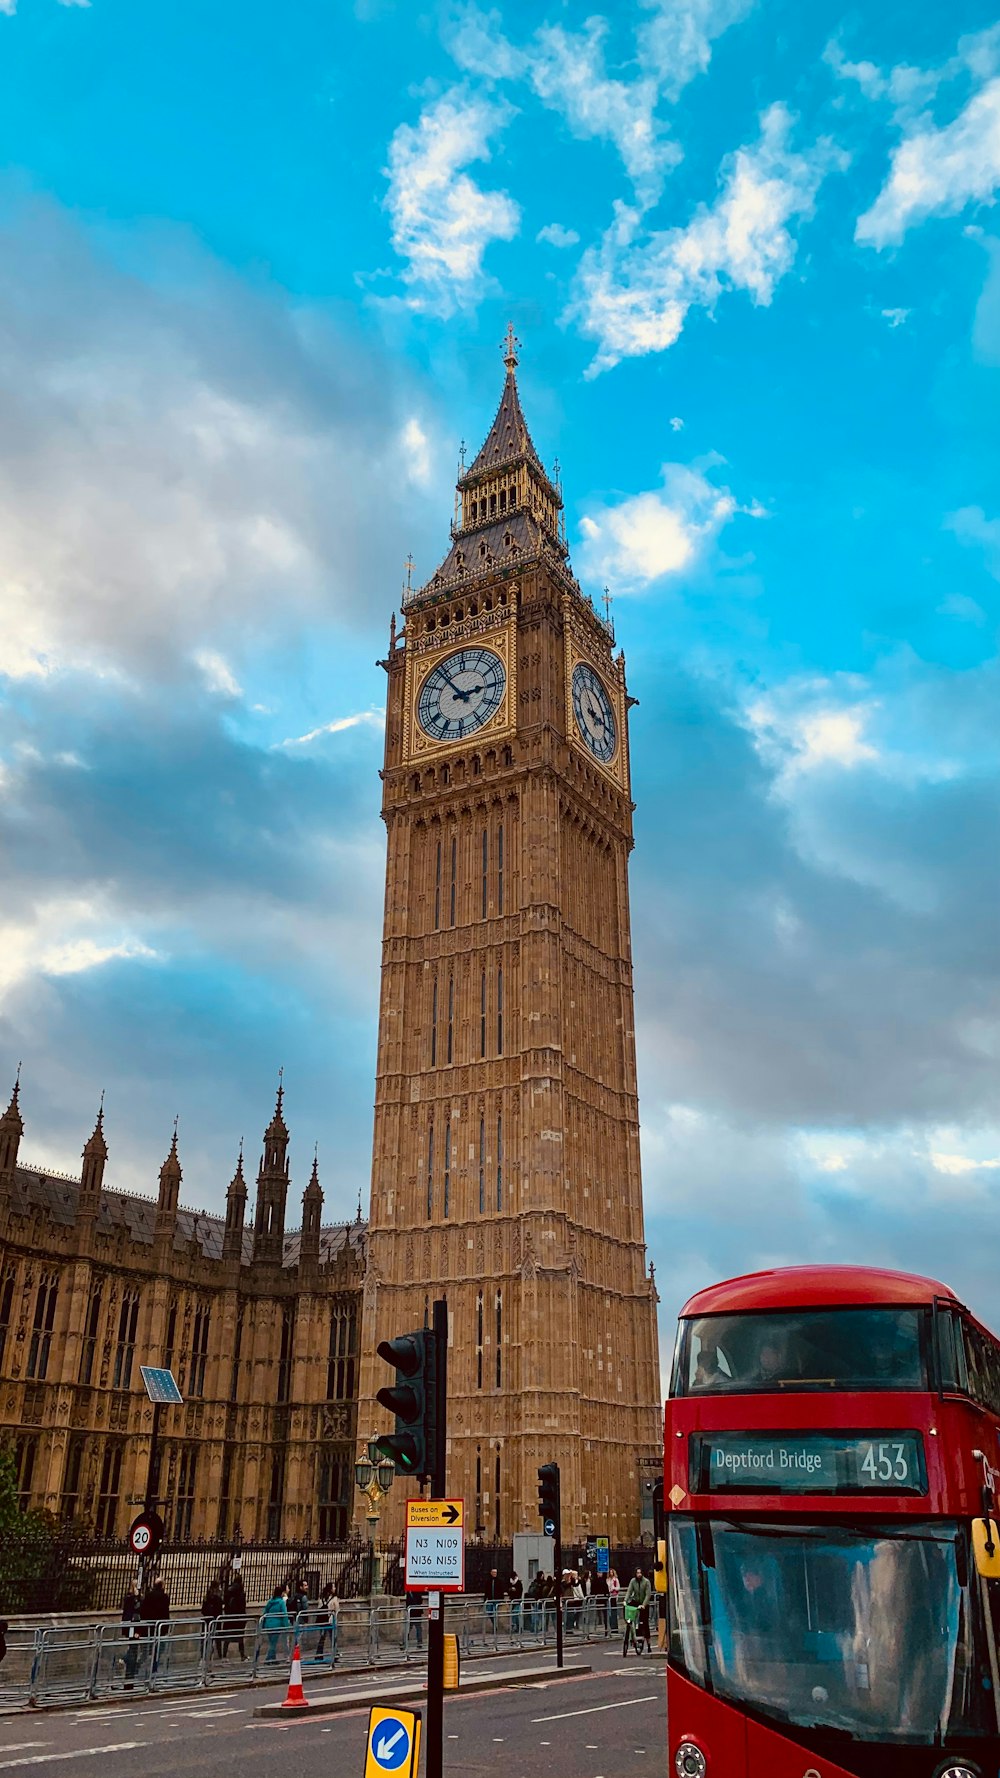 a red double decker bus driving past a tall clock tower